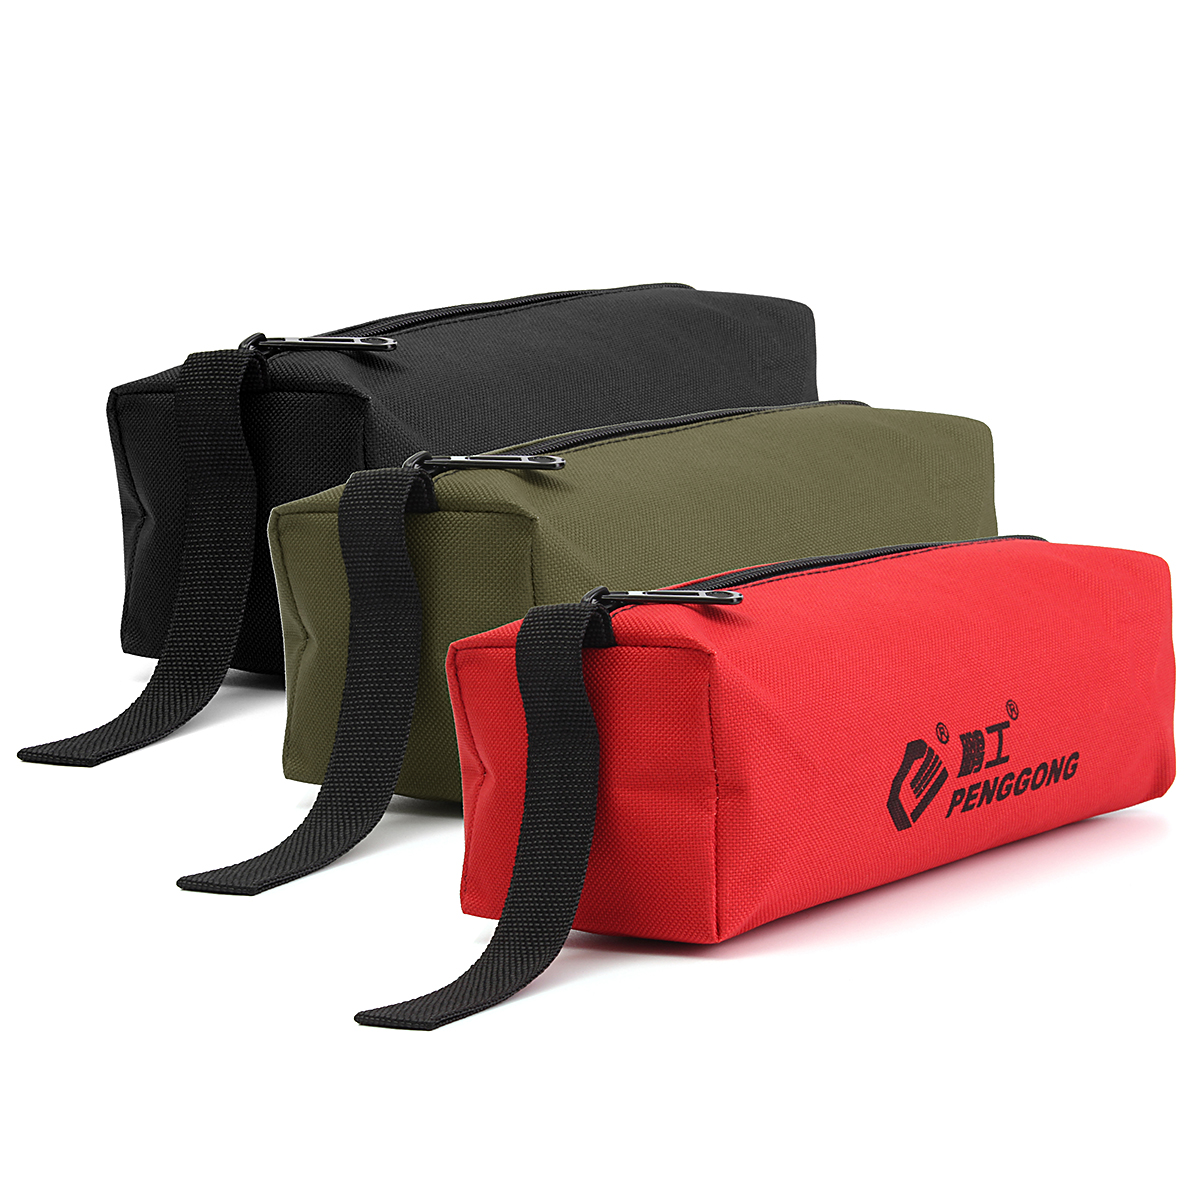 Multifunctional-Storage-Tools-Bag-Utility-Bag-Oxford-Canvas-for-Small-Metal-Parts-1120172-5